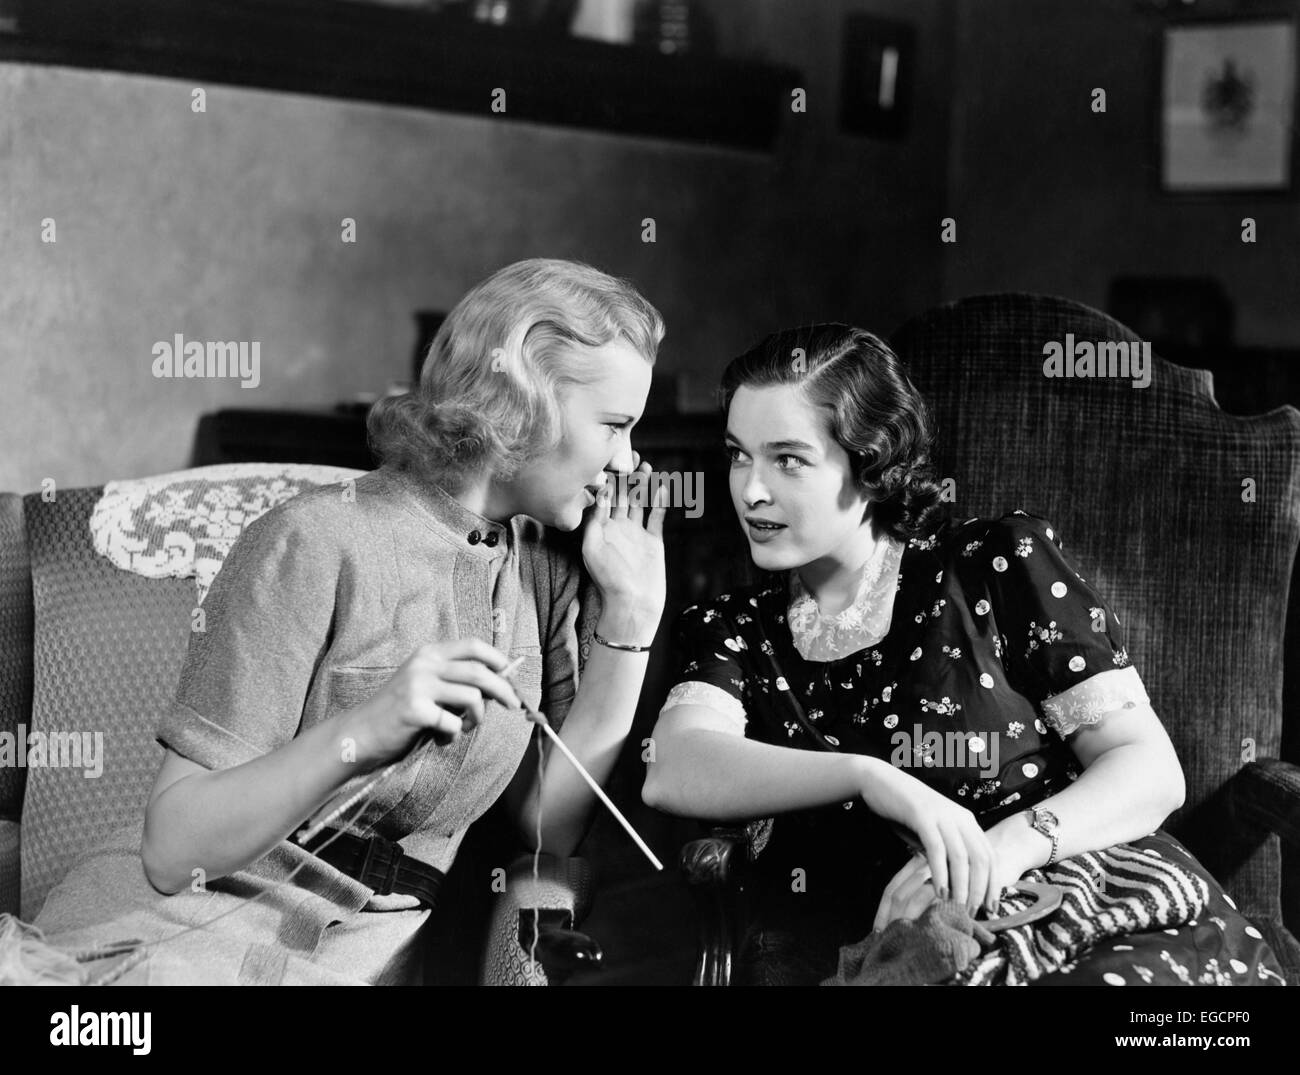 1930s TWO WOMEN SITTING IN CHAIRS IN PRIVATE CONVERSATION WOMAN HAS HAND TO SIDE OF MOUTH TO TELL SECRET Stock Photo